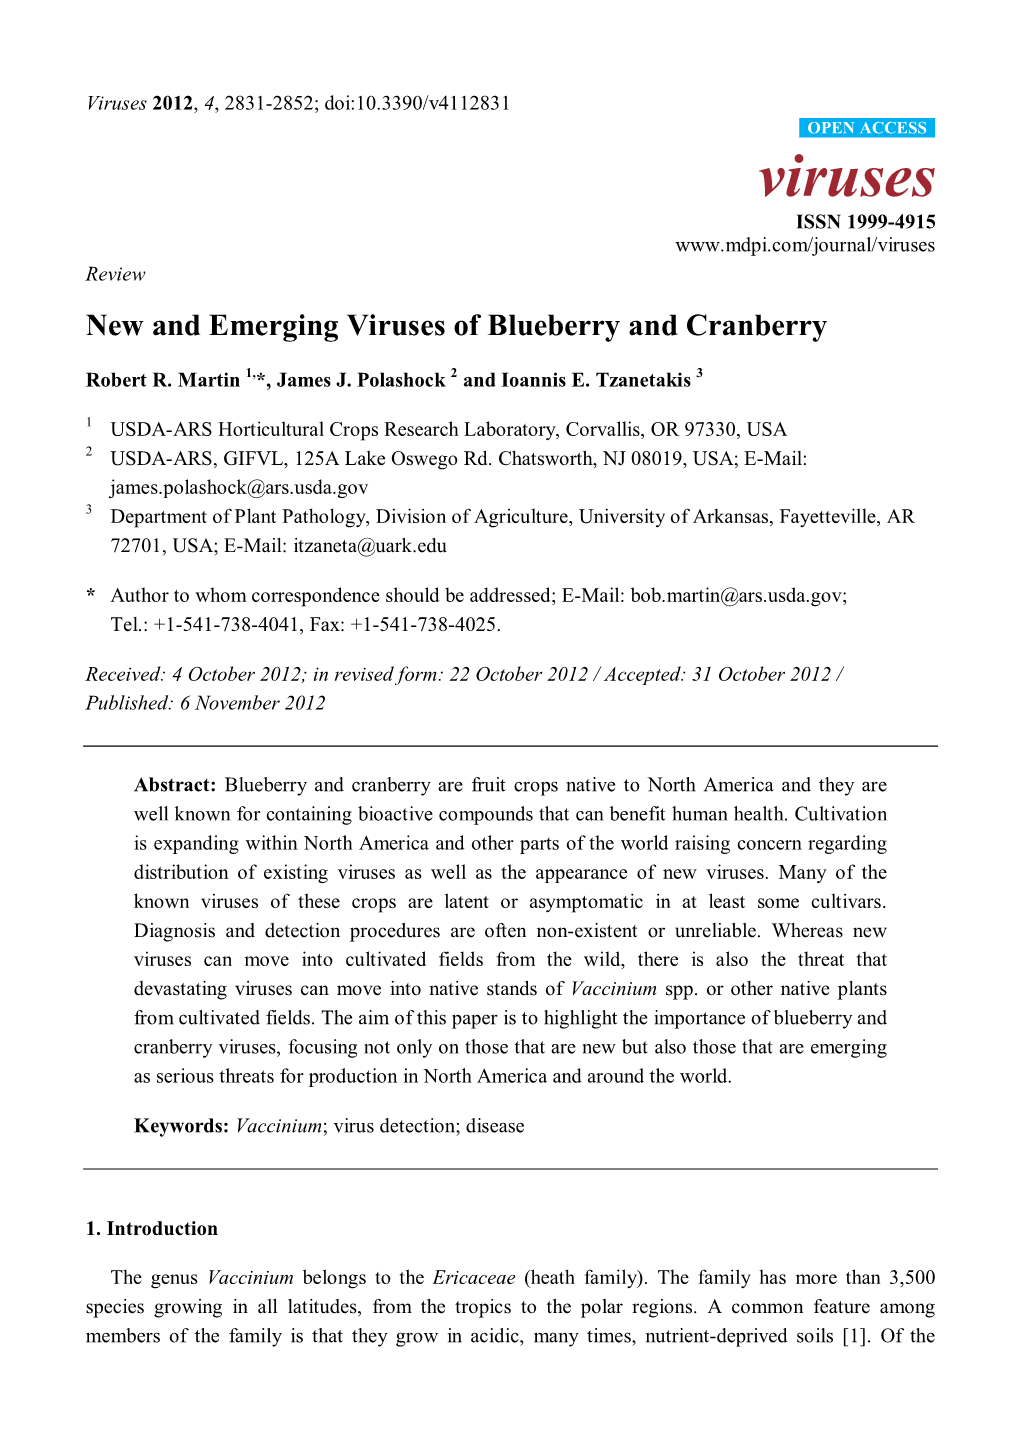 New and Emerging Viruses of Blueberry and Cranberry